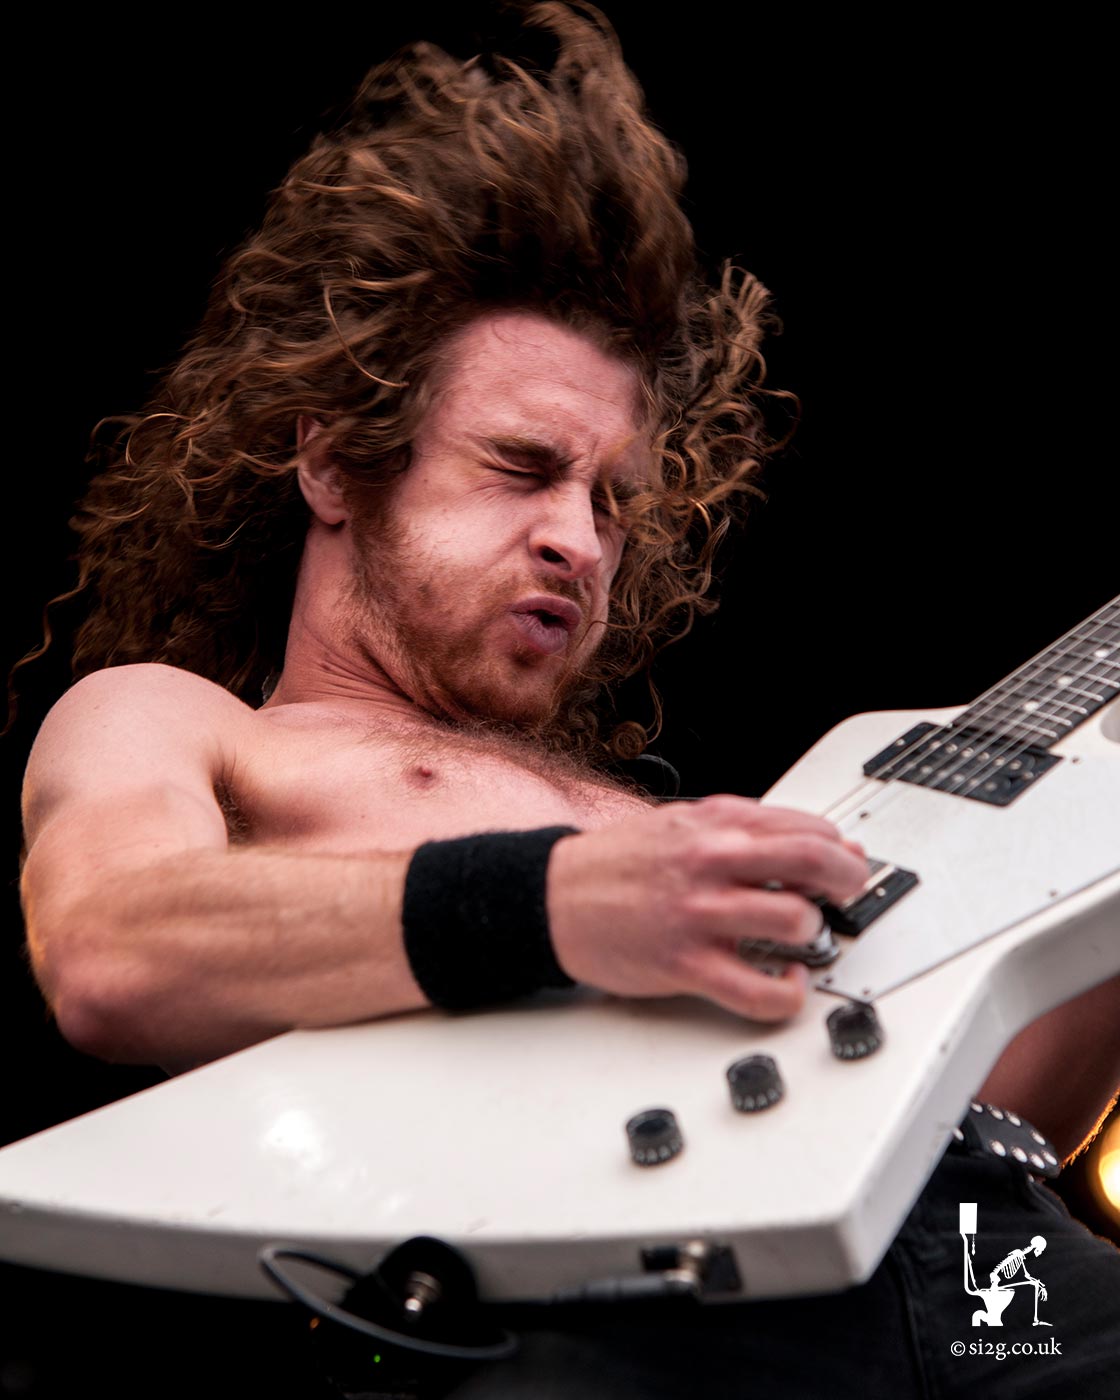 Airbourne - Joel OKeeffe, vocalist and lead guitarist for Australian hard rock band Airbourne, commands the Download Festival to rock to the tune of his white Gibson Explorer guitar.  Hidden between his fingers is the legendary Pick of Destiny, an evil yet powerful guitar plectrum used by all the greatest rock musicians.